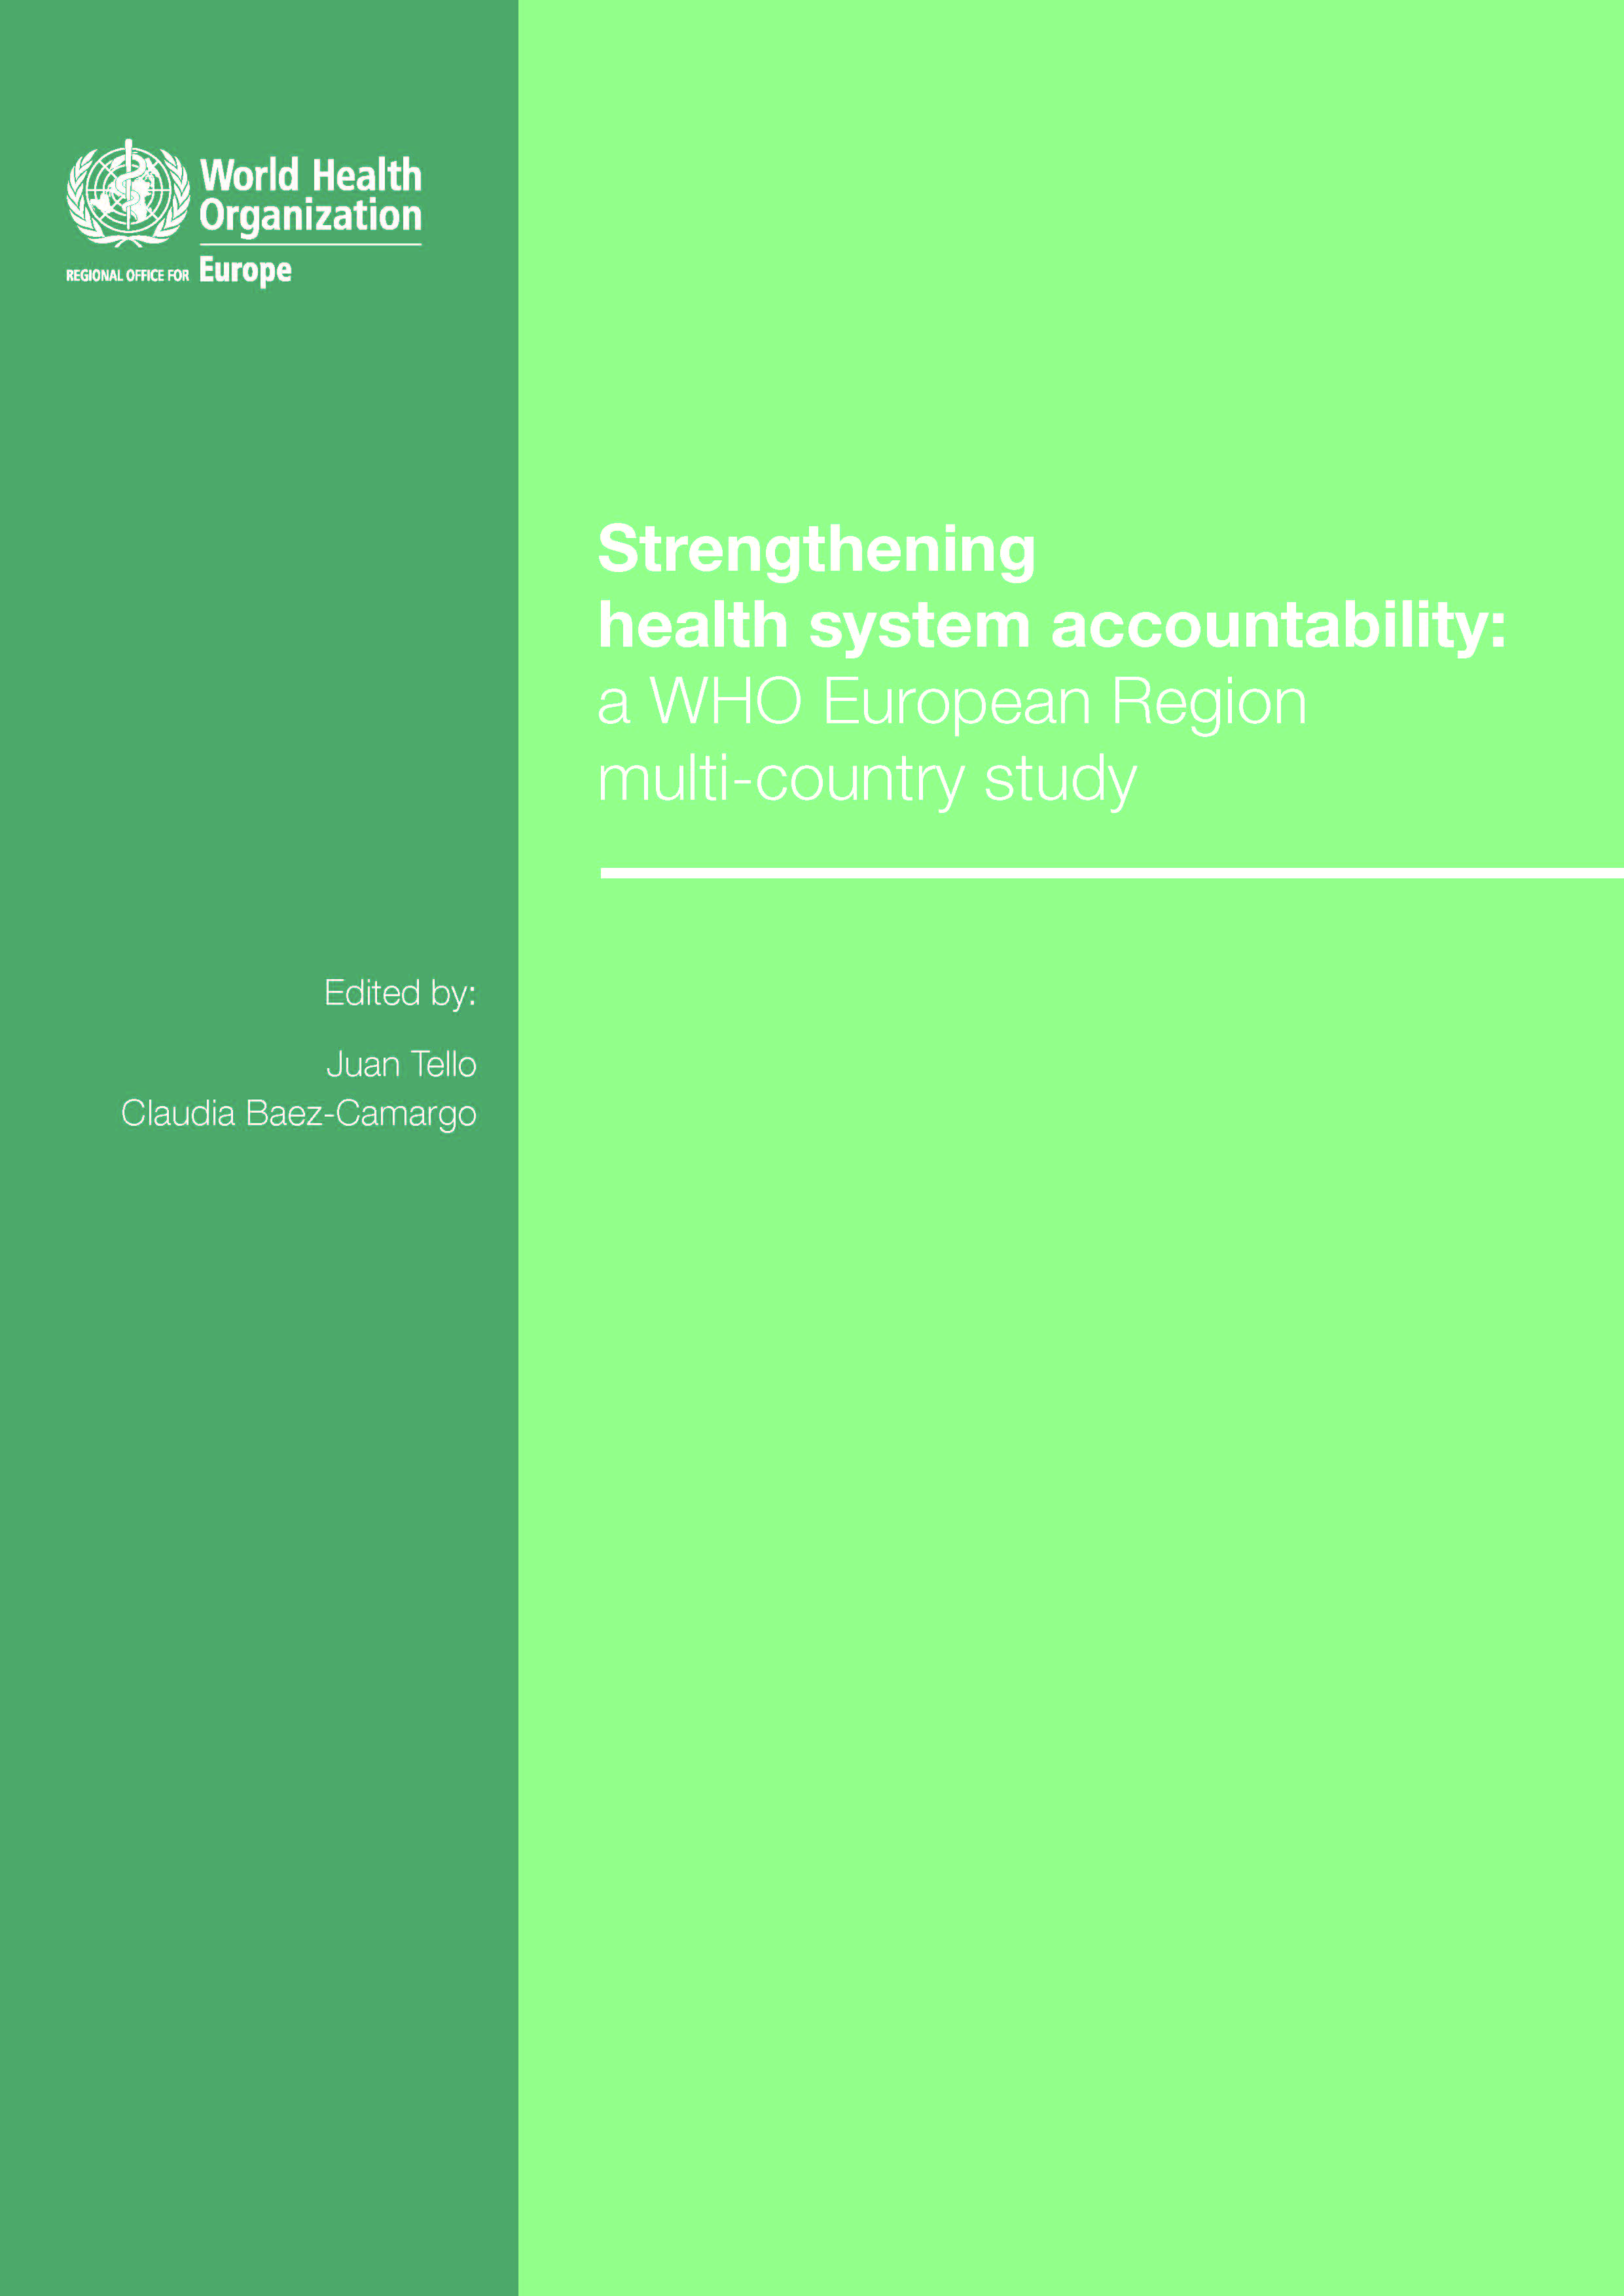 Cover of Strengthening Health System Accountability report